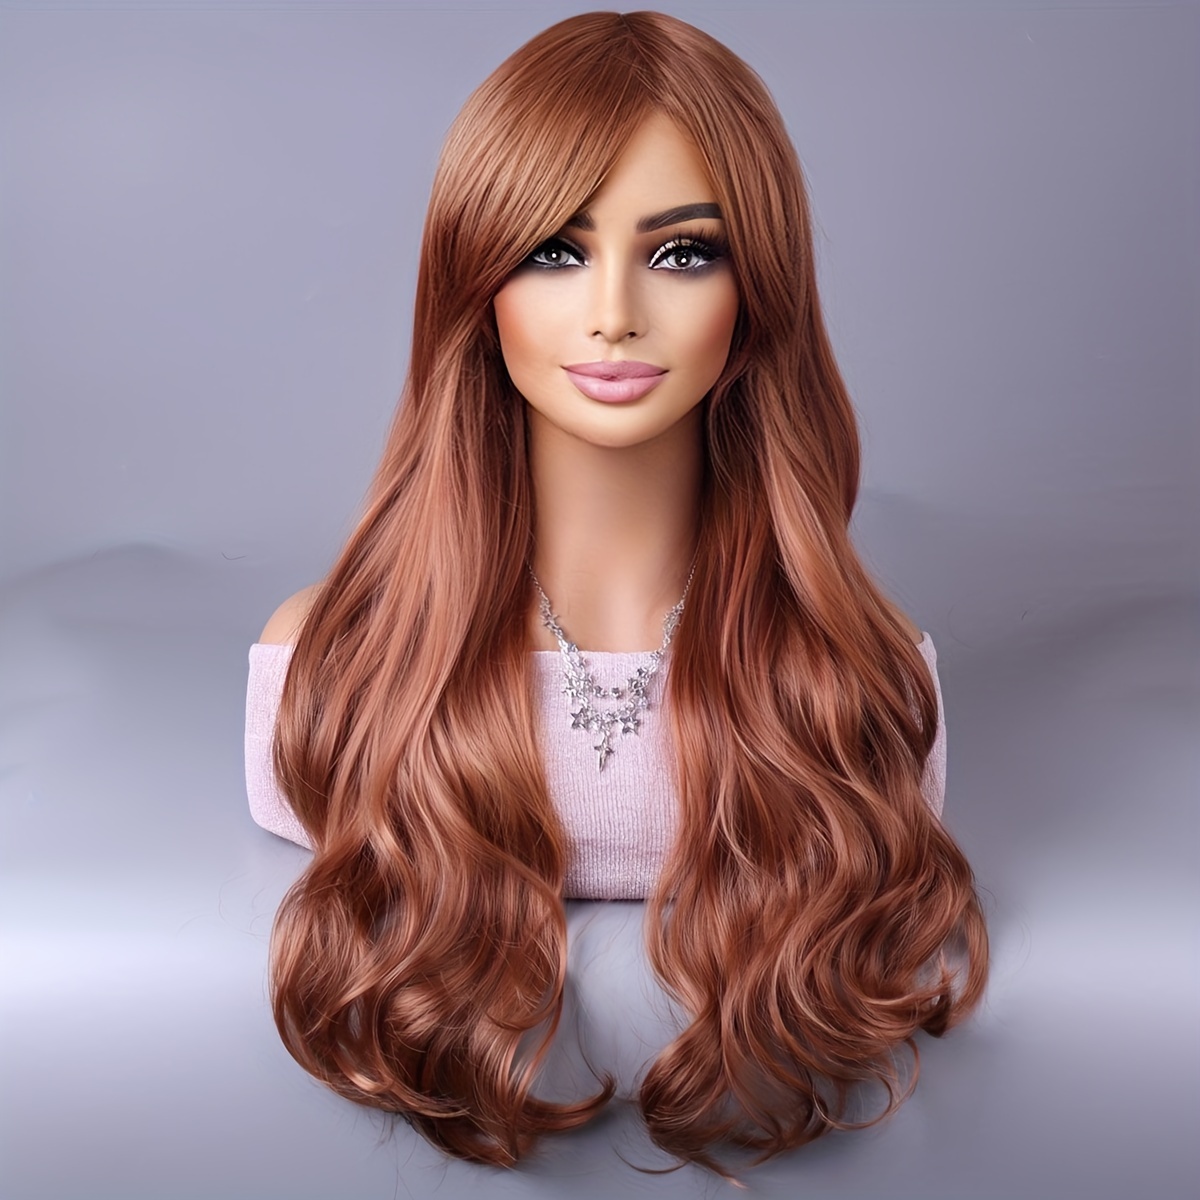 

Long Reddish Brown Curly Wig With Bangs For Women Curly Wavy Wigs Synthetic Heat Resistant Fiber For Daily Party Cosplay Use